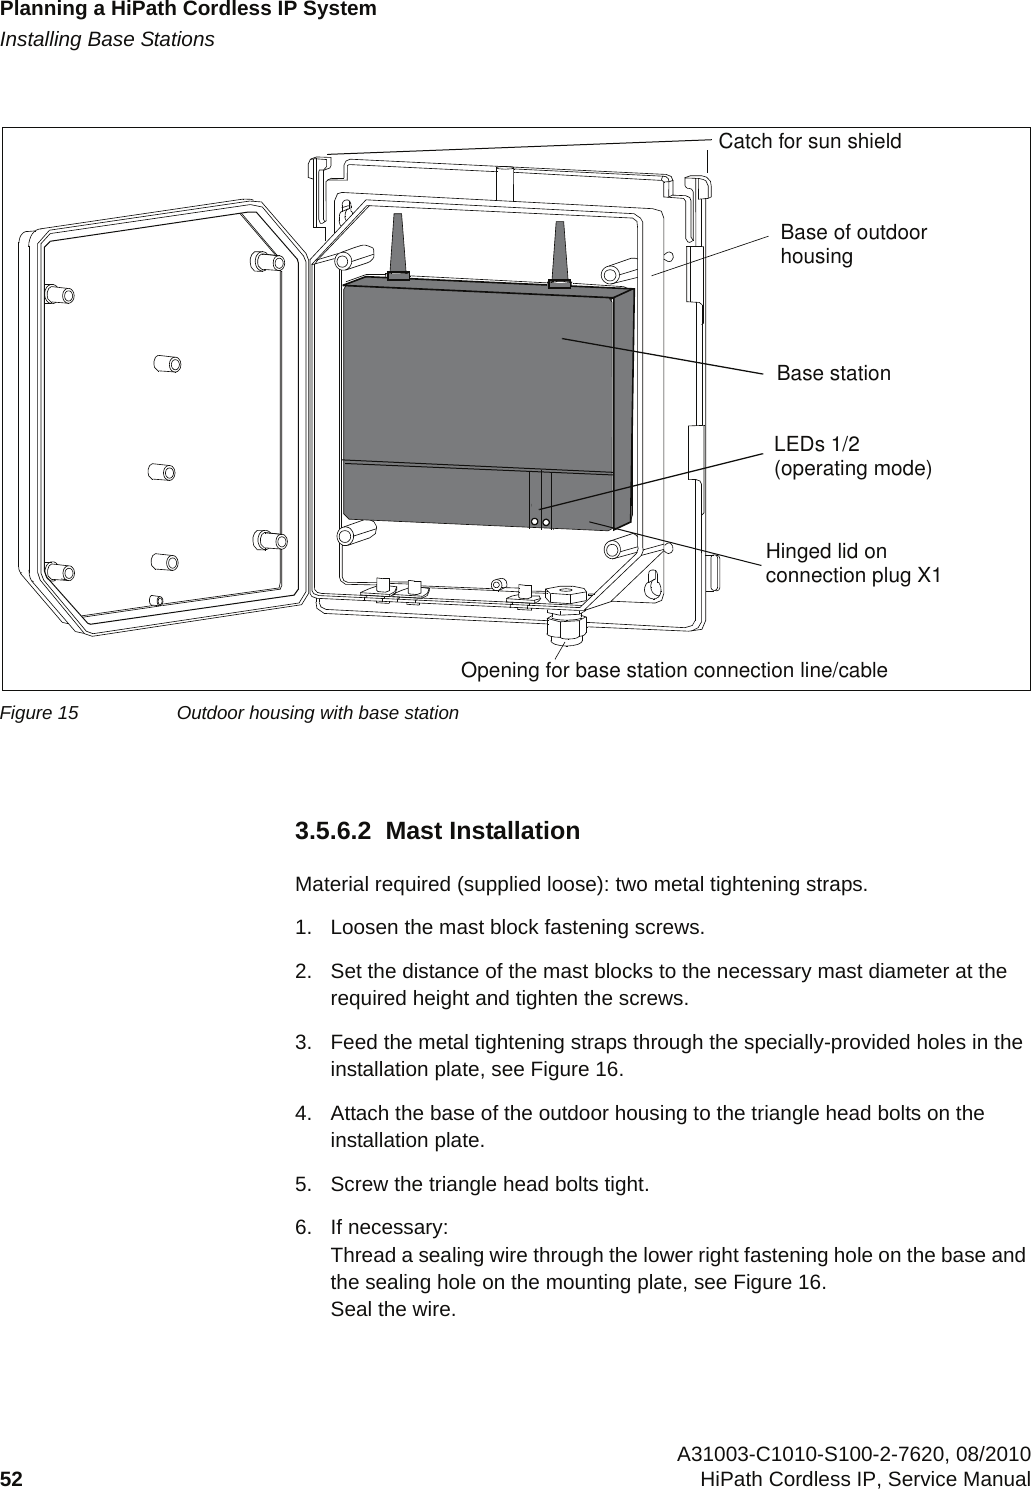 Planning a HiPath Cordless IP Systemc03.fmInstalling Base Stations A31003-C1010-S100-2-7620, 08/201052 HiPath Cordless IP, Service Manual          3.5.6.2  Mast InstallationMaterial required (supplied loose): two metal tightening straps.1. Loosen the mast block fastening screws.2. Set the distance of the mast blocks to the necessary mast diameter at the required height and tighten the screws.3. Feed the metal tightening straps through the specially-provided holes in the installation plate, see Figure 16.4. Attach the base of the outdoor housing to the triangle head bolts on the installation plate.5. Screw the triangle head bolts tight.6. If necessary:Thread a sealing wire through the lower right fastening hole on the base and the sealing hole on the mounting plate, see Figure 16. Seal the wire.Figure 15 Outdoor housing with base stationCatch for sun shieldBase of outdoorhousingBase stationLEDs 1/2(operating mode)Hinged lid onconnection plug X1Opening for base station connection line/cable